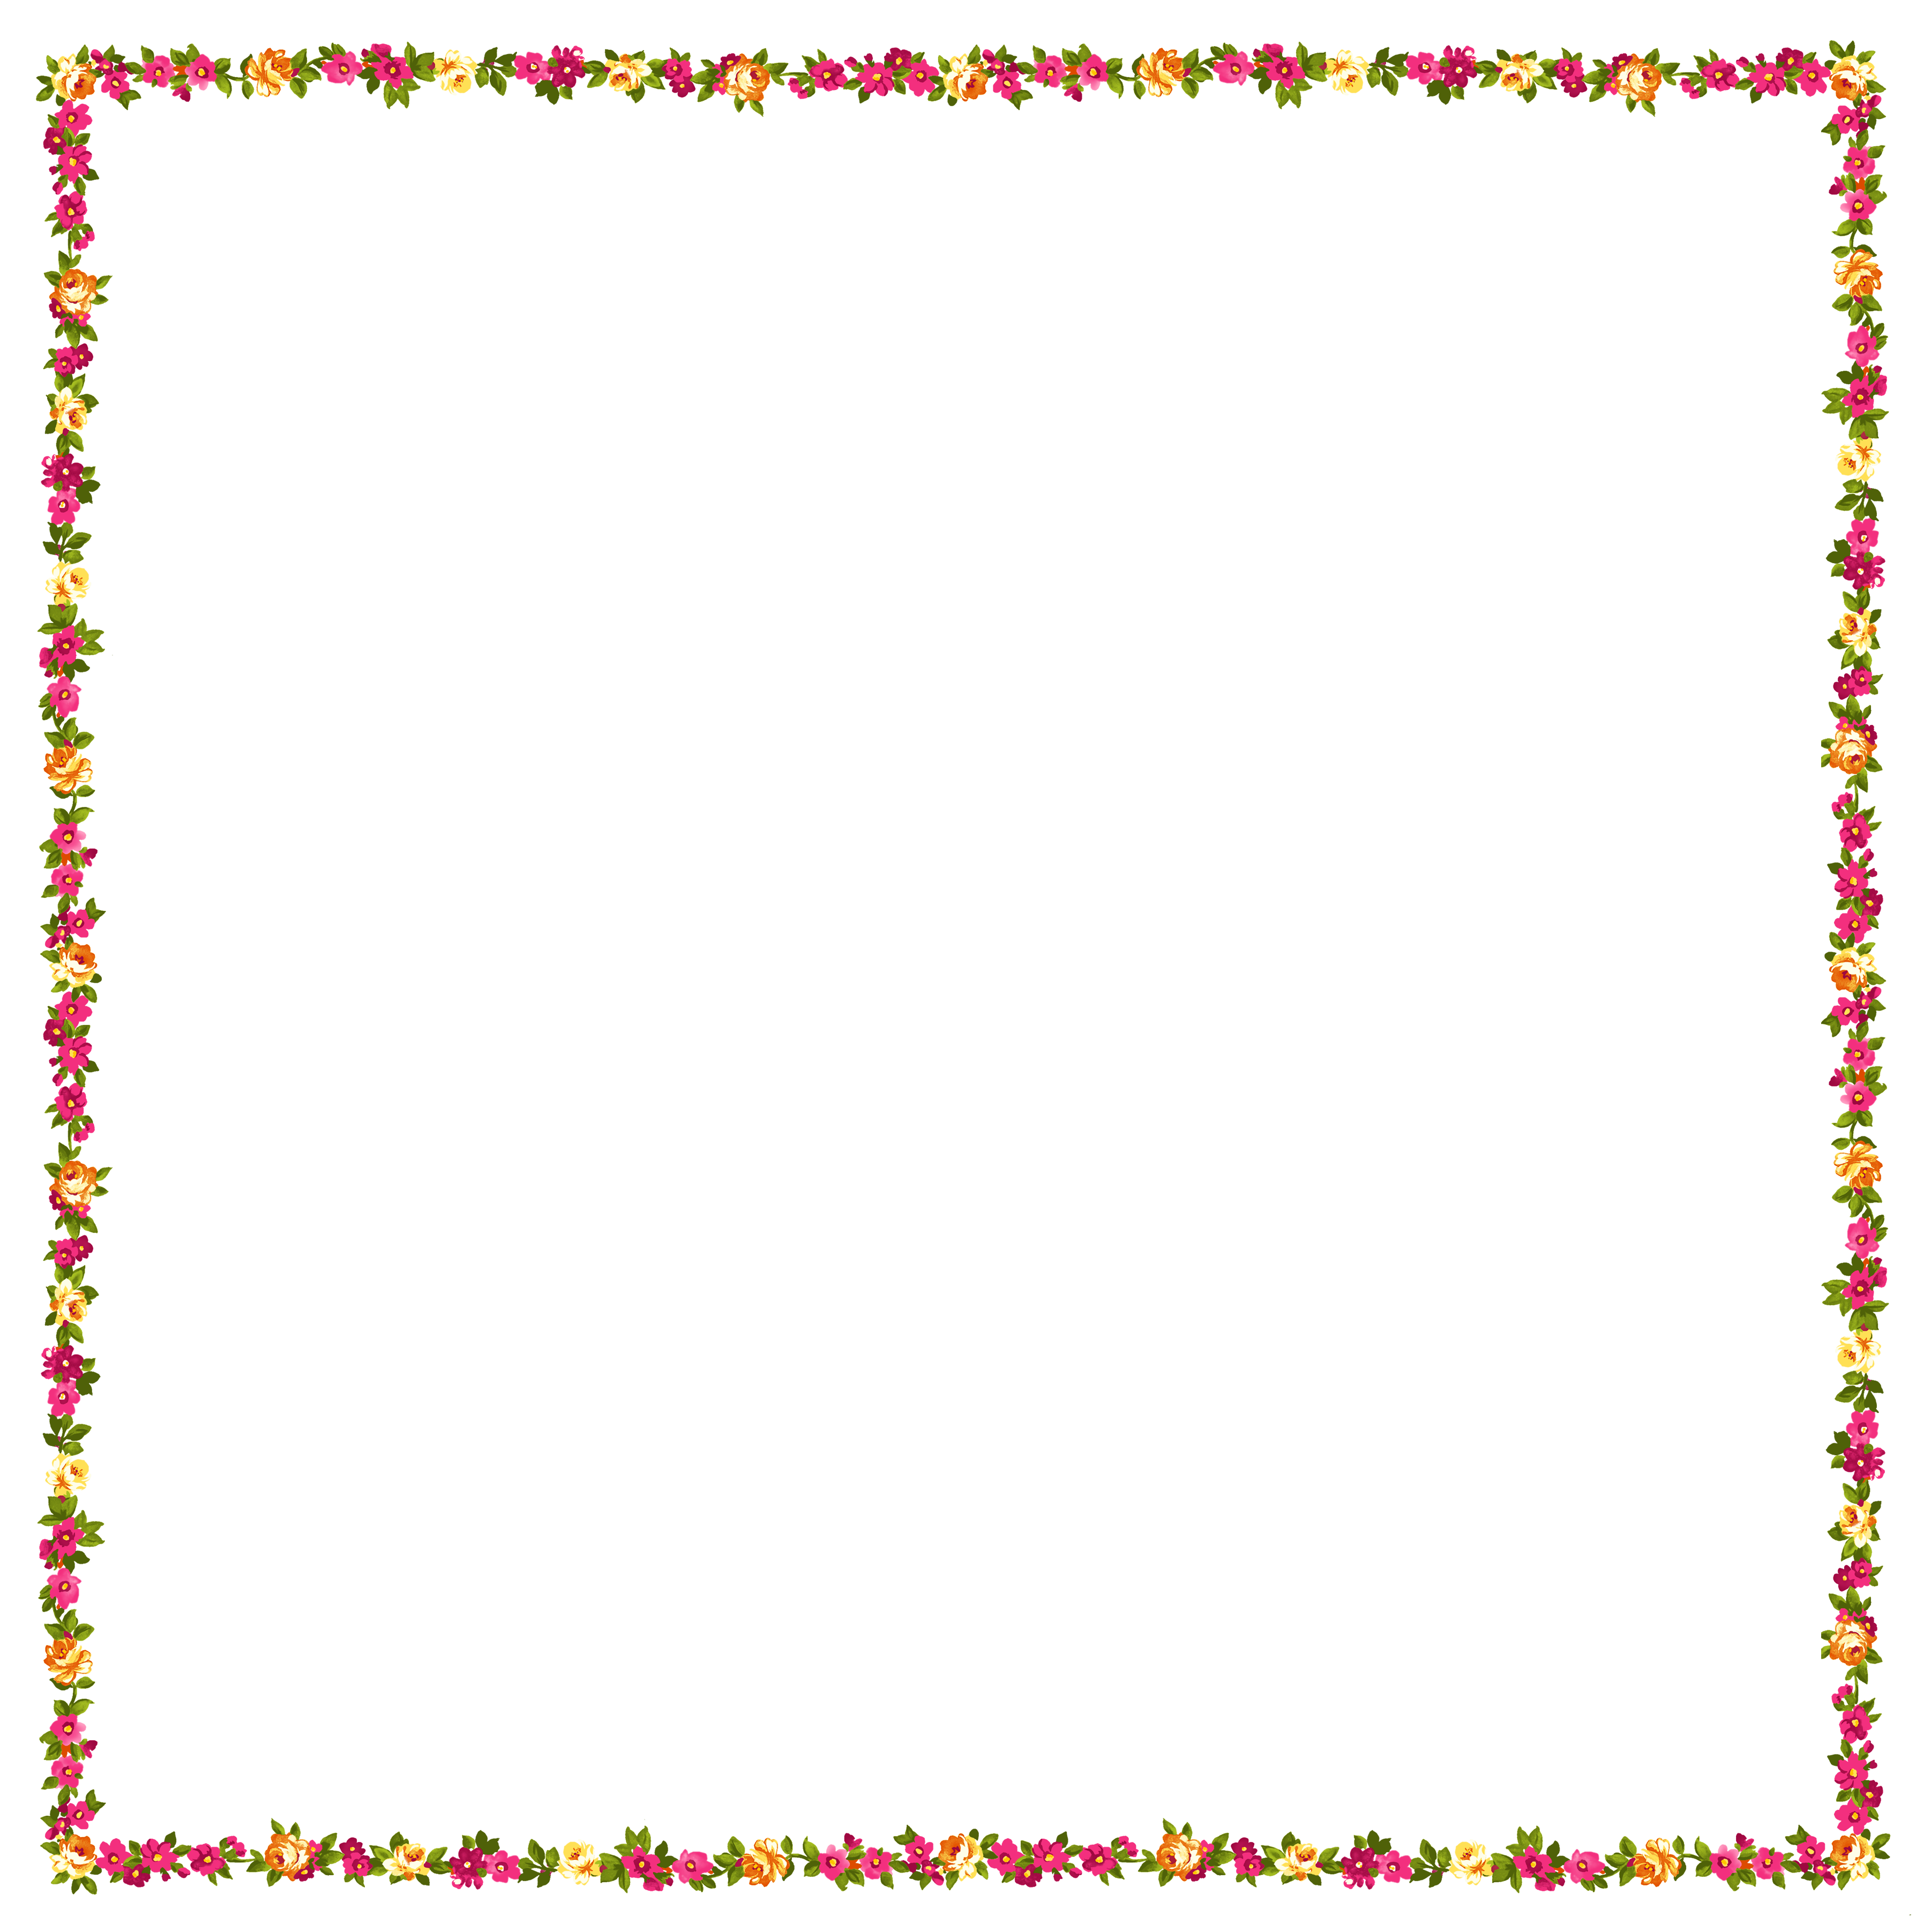 png clipart frame - photo #1